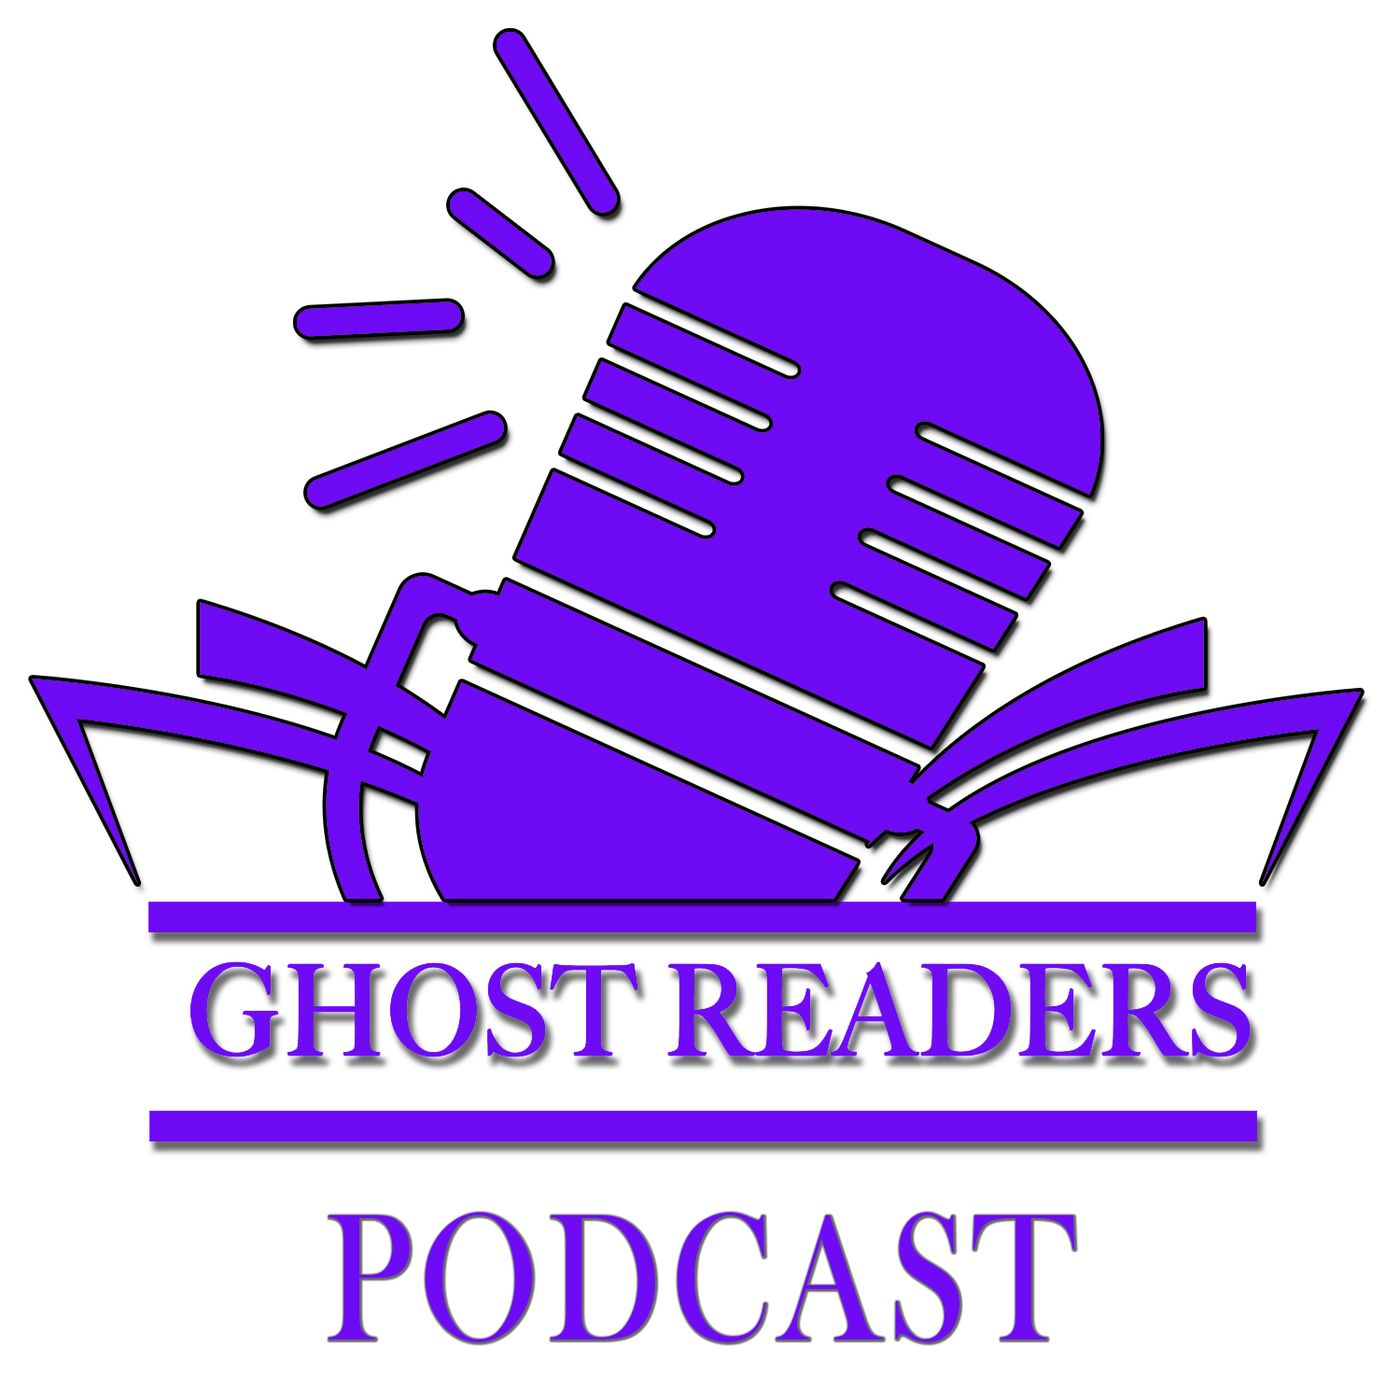 Ghostreaders Podcast